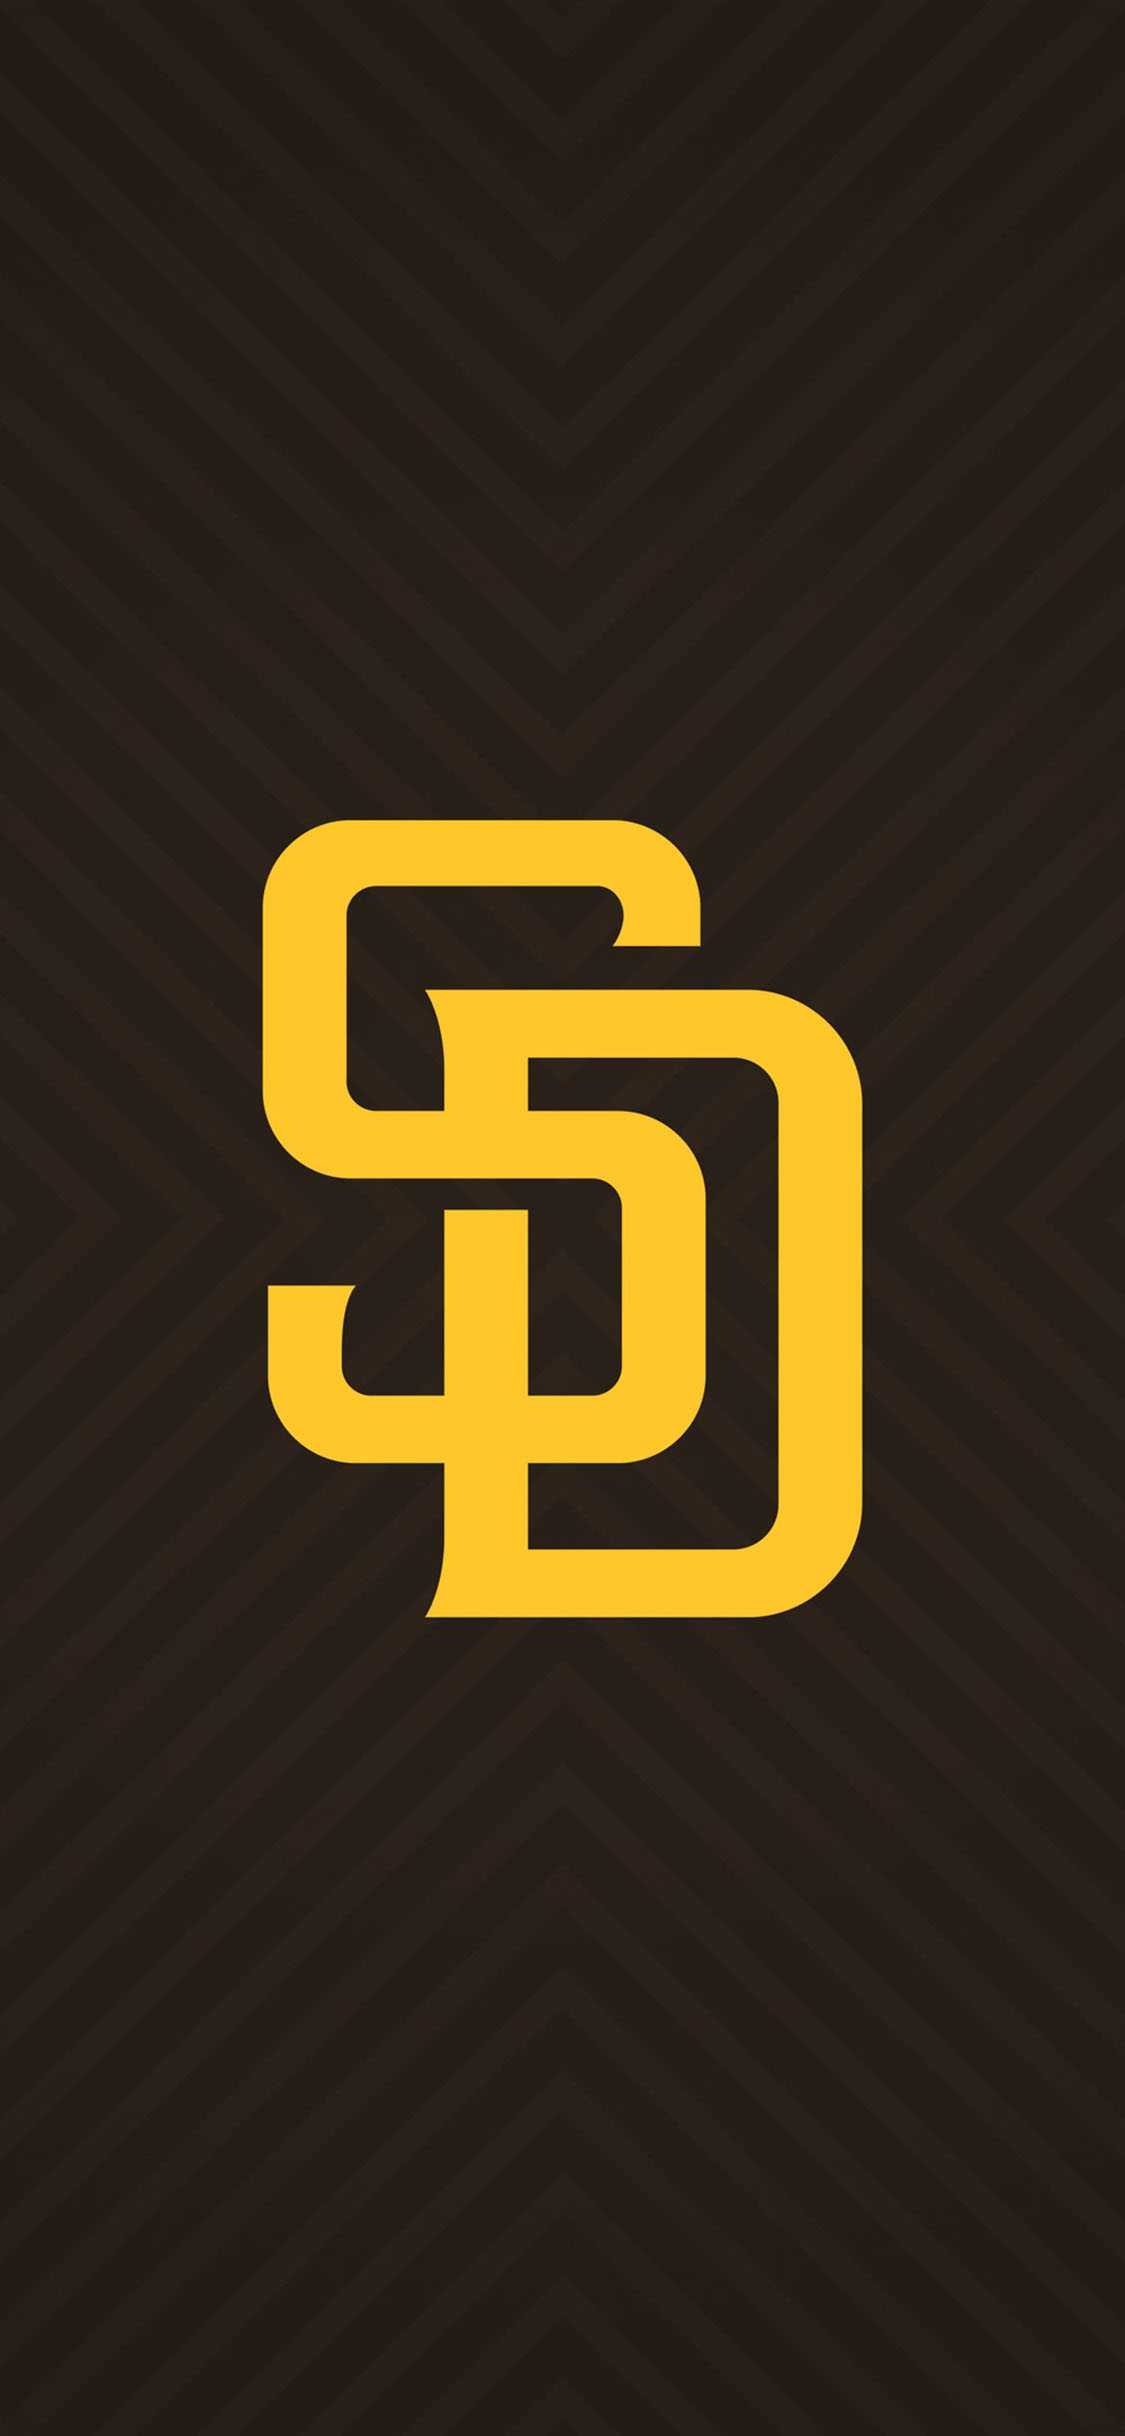 San Diego Padres, Wallpaper android awesome free, HD, Sports, 1130x2440 HD Handy